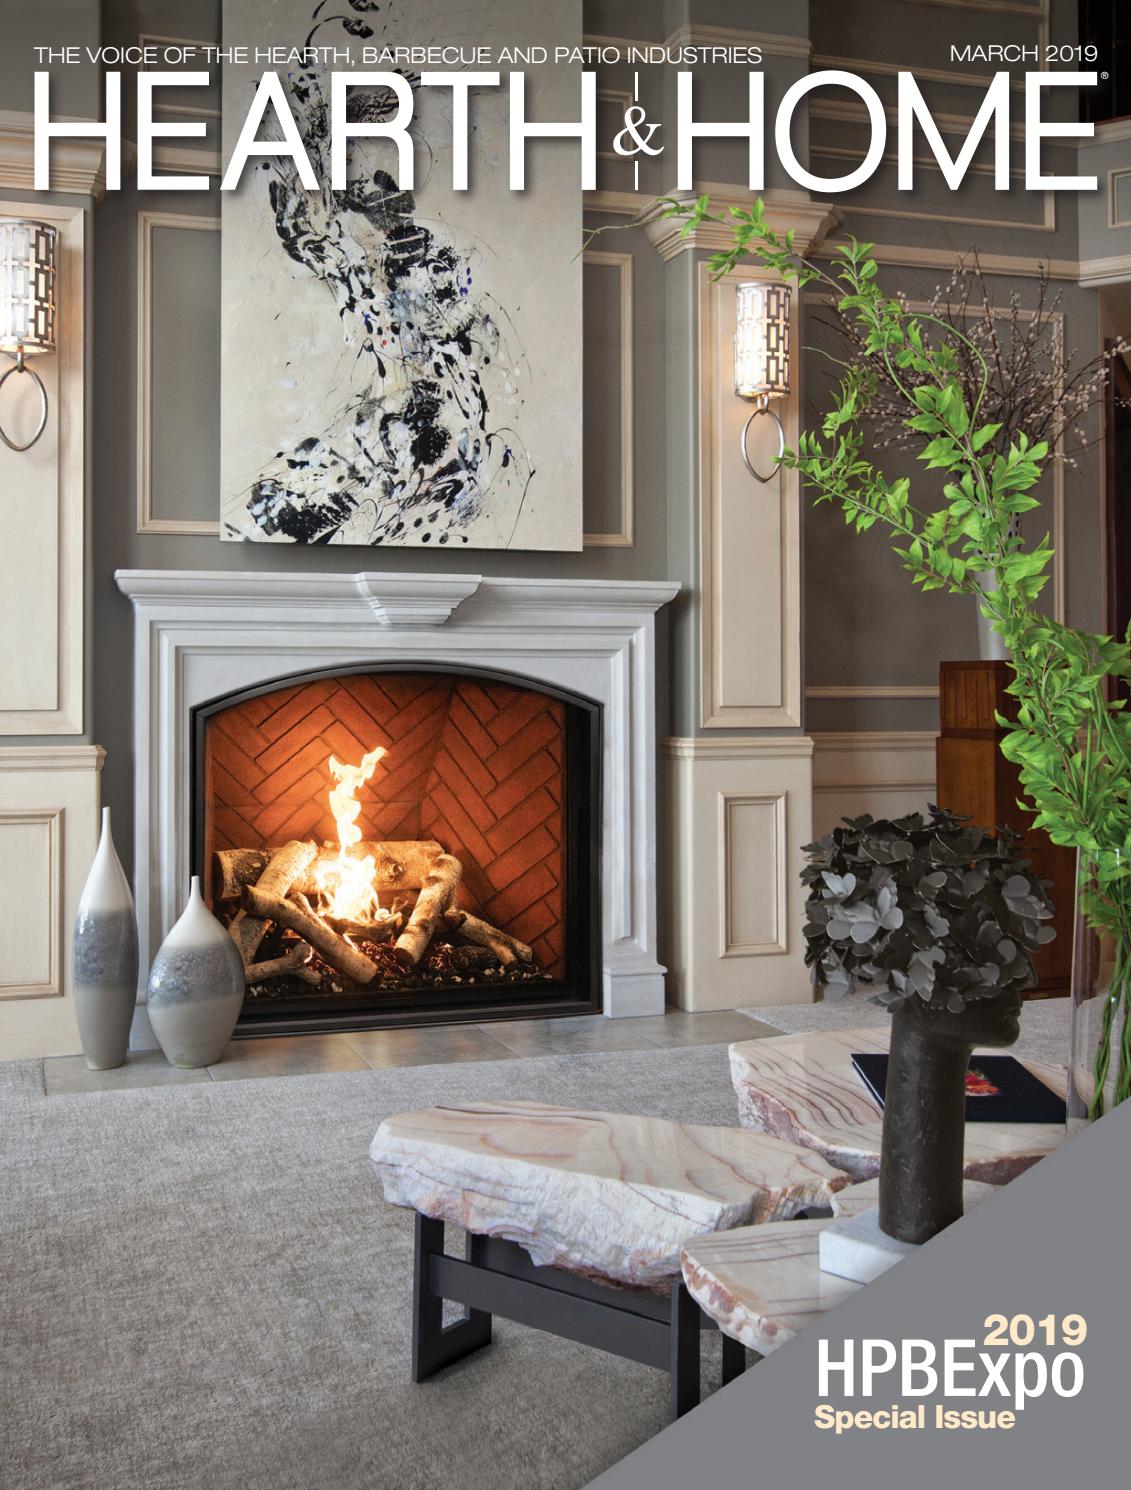 Direct Vent Fireplace Outside Cover Beautiful Hearth & Home Magazine – 2019 March issue by Hearth & Home